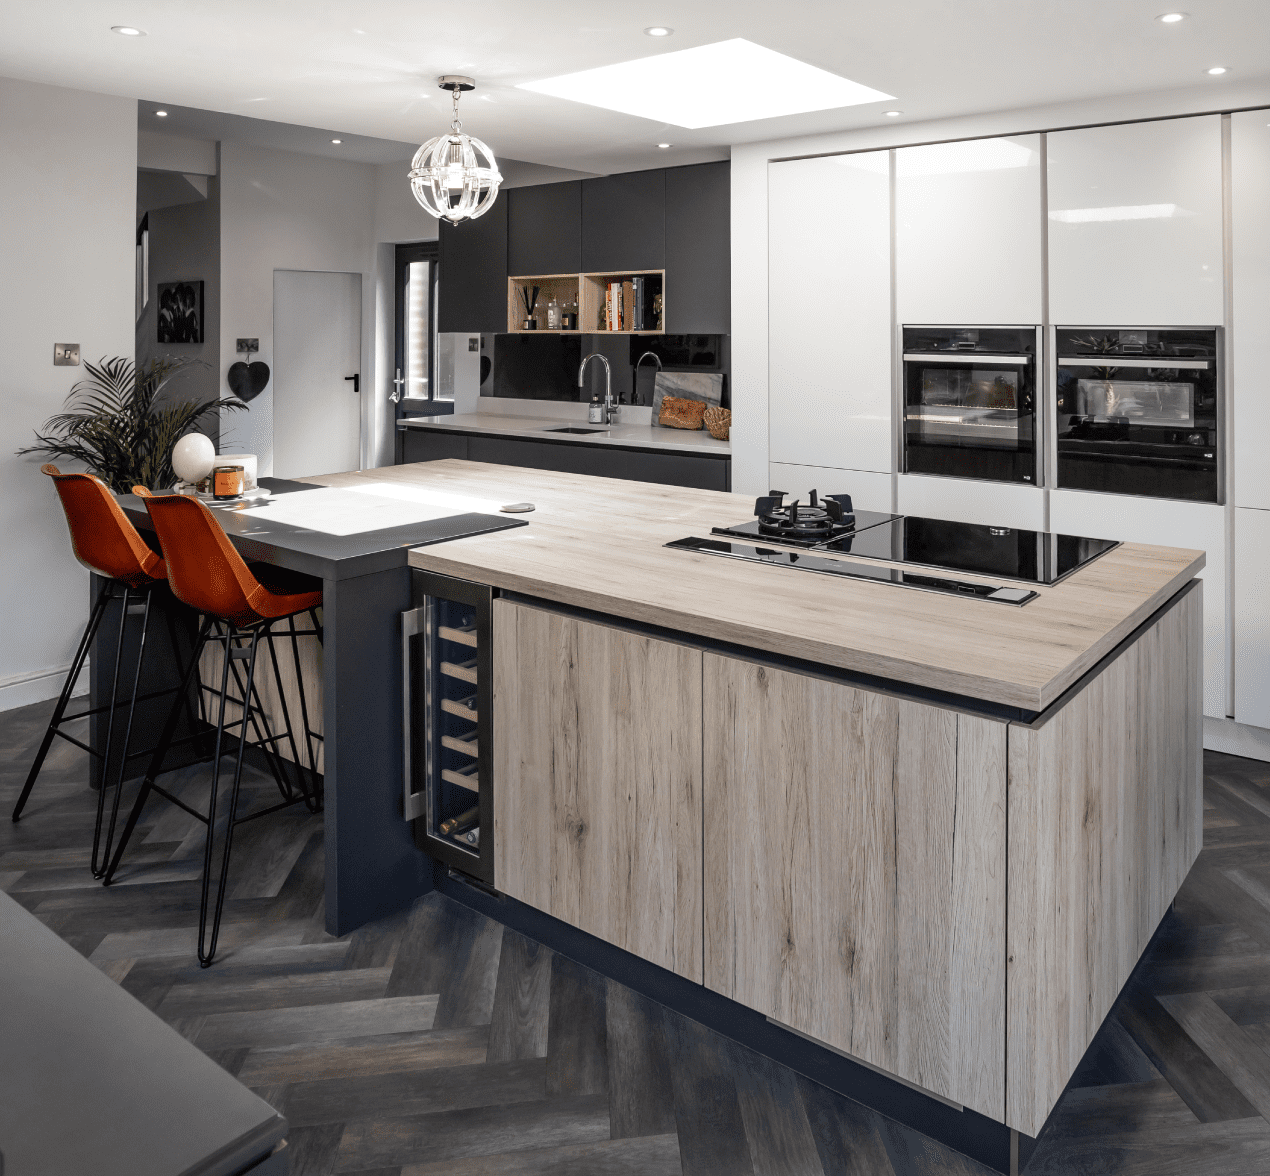 A contemporary kitchen for a period property